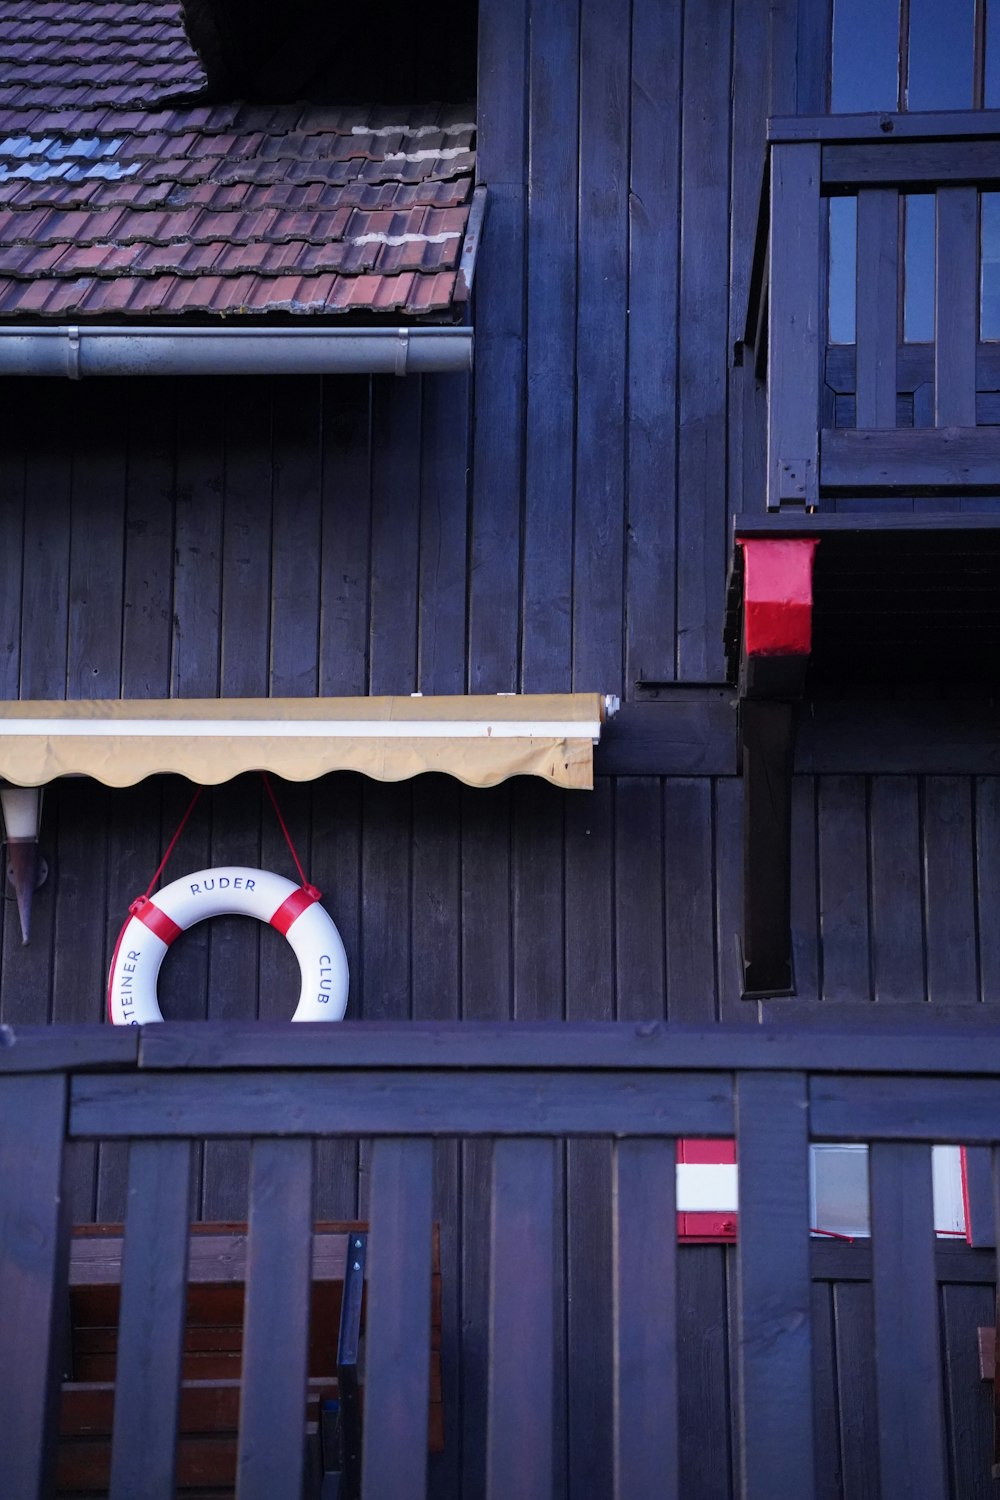 a life preserver hanging on the side of a building